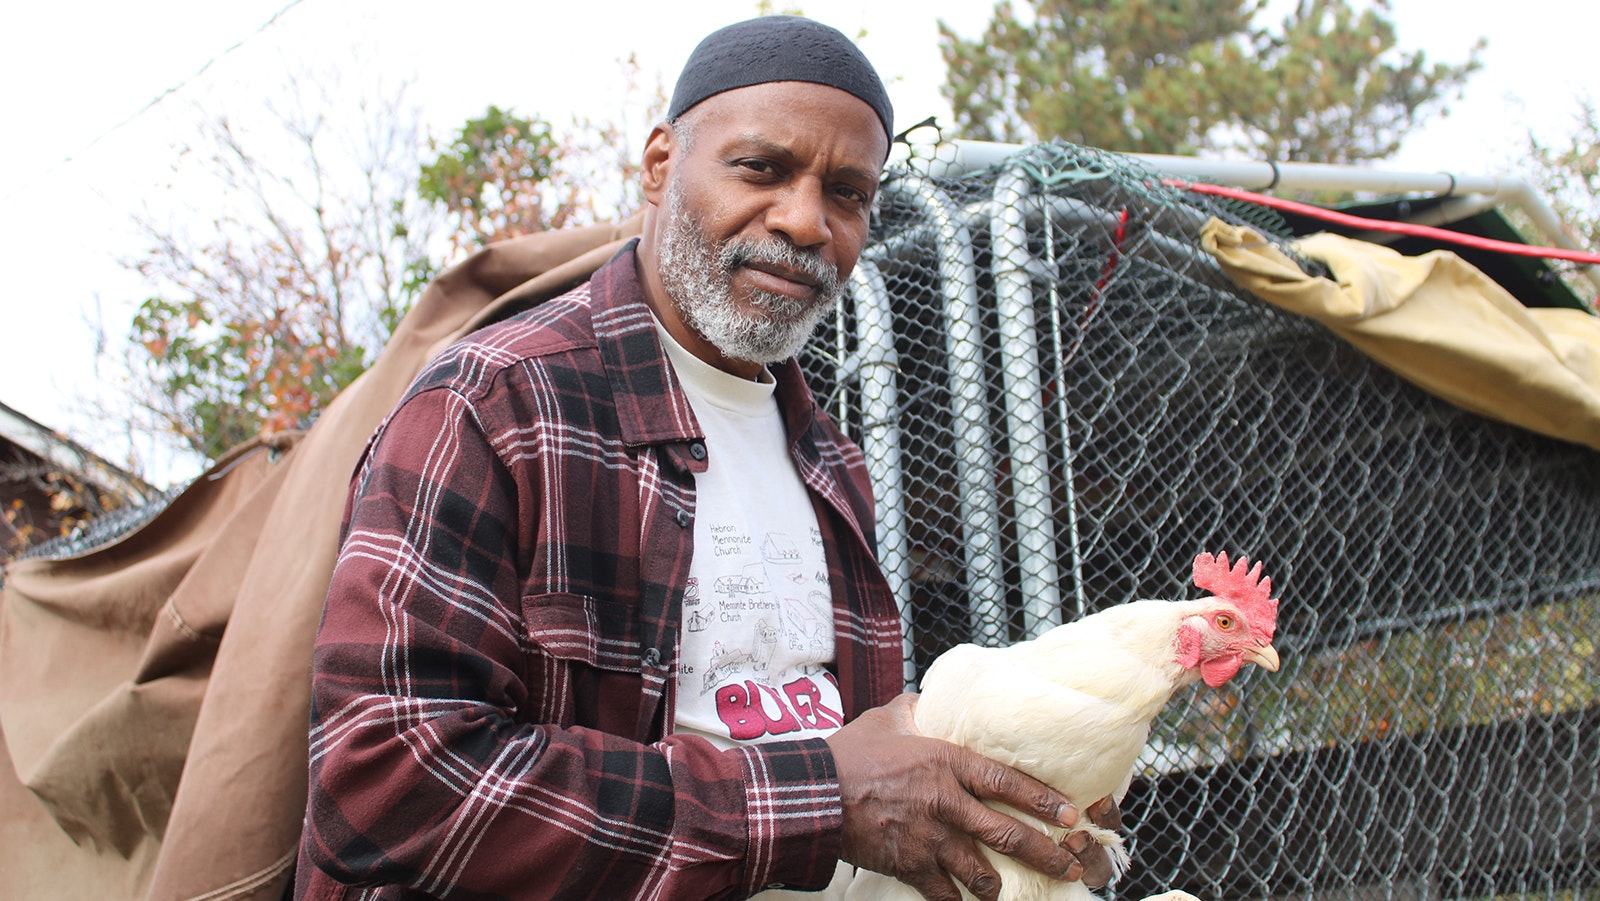 Clarence Fisher with one of his chickens.